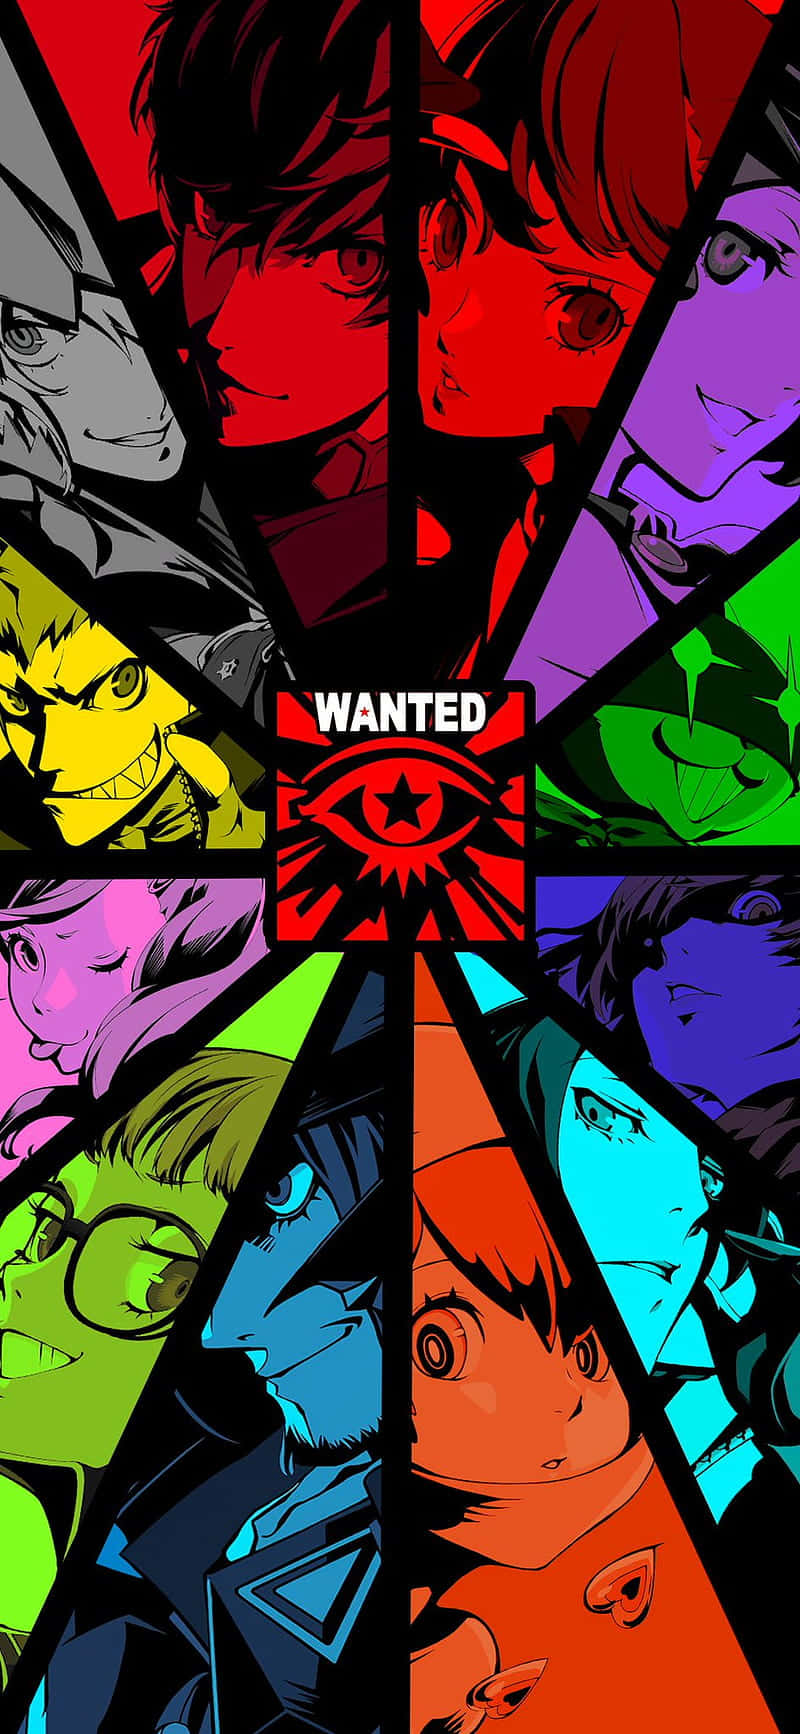 Persona 5  Take Your Heart iPhone Wallpaper by witsawat33 on DeviantArt